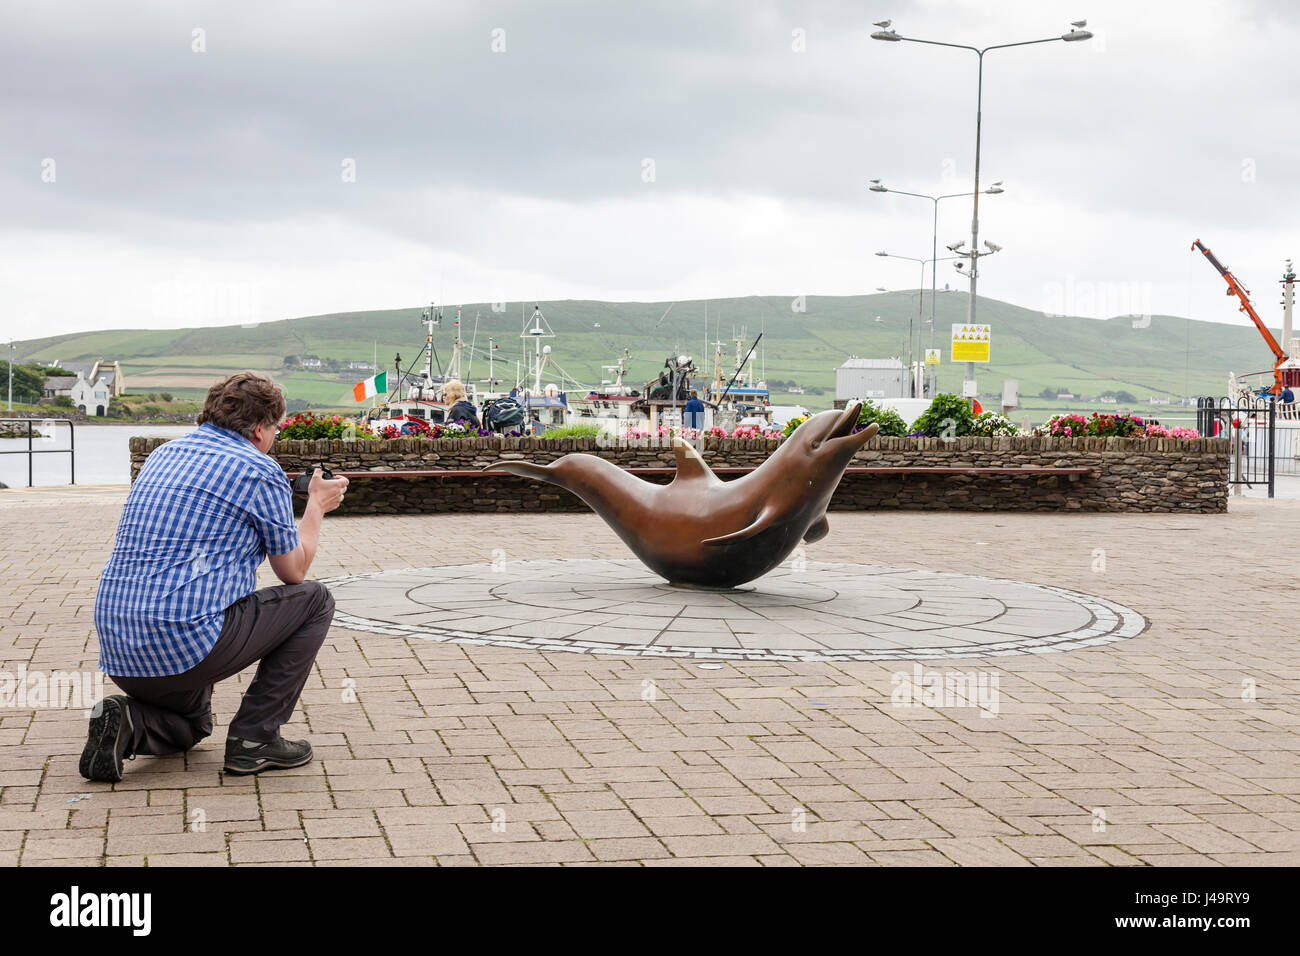 Dingle, County Kerry, Ireland - A tourist photographing the statue of Fungie the dolphin in the town of Dingle. Stock Photo